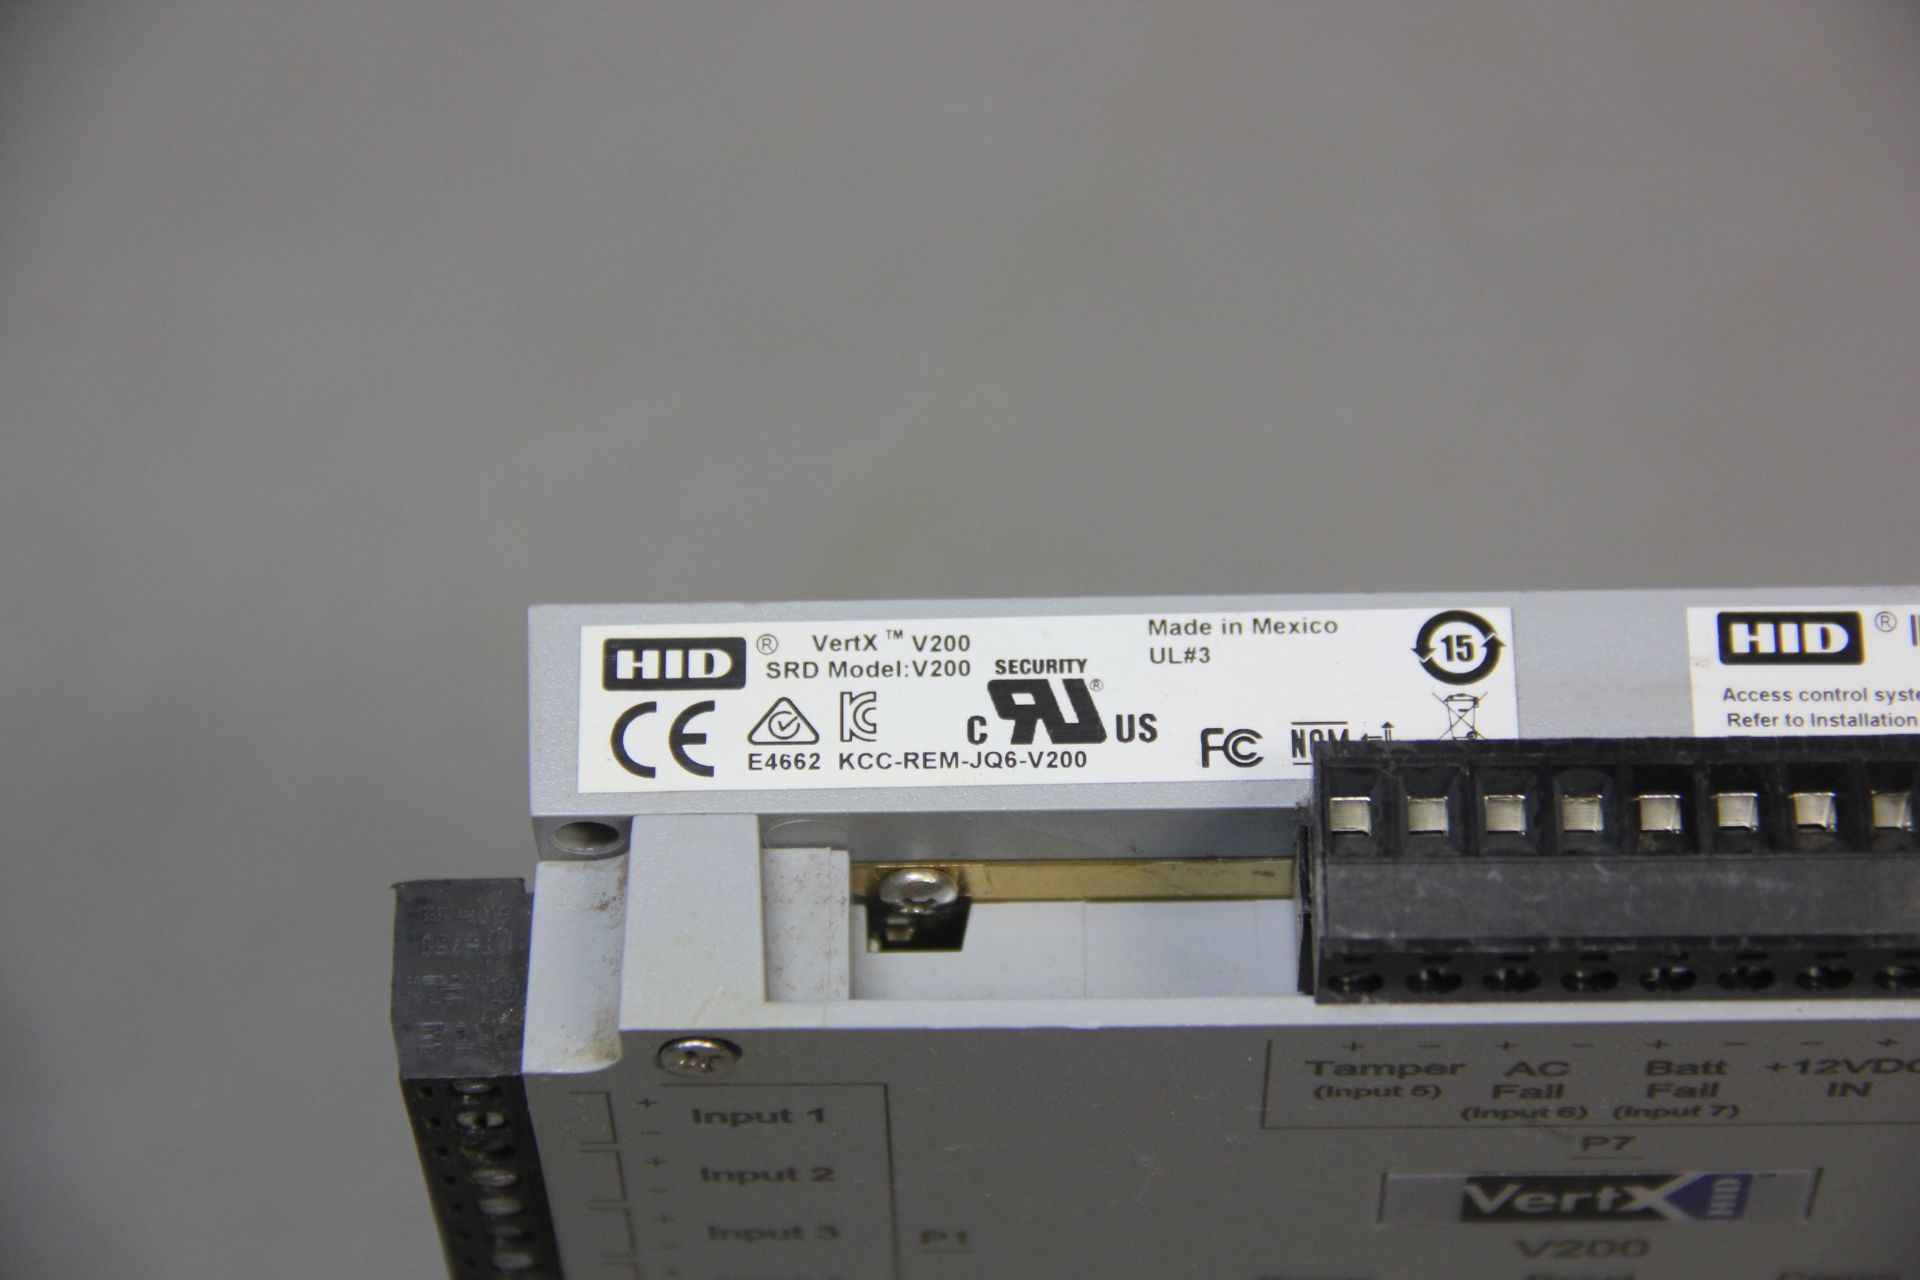 HID VERTX V200 ACCESS CONTROLLER - Image 2 of 4